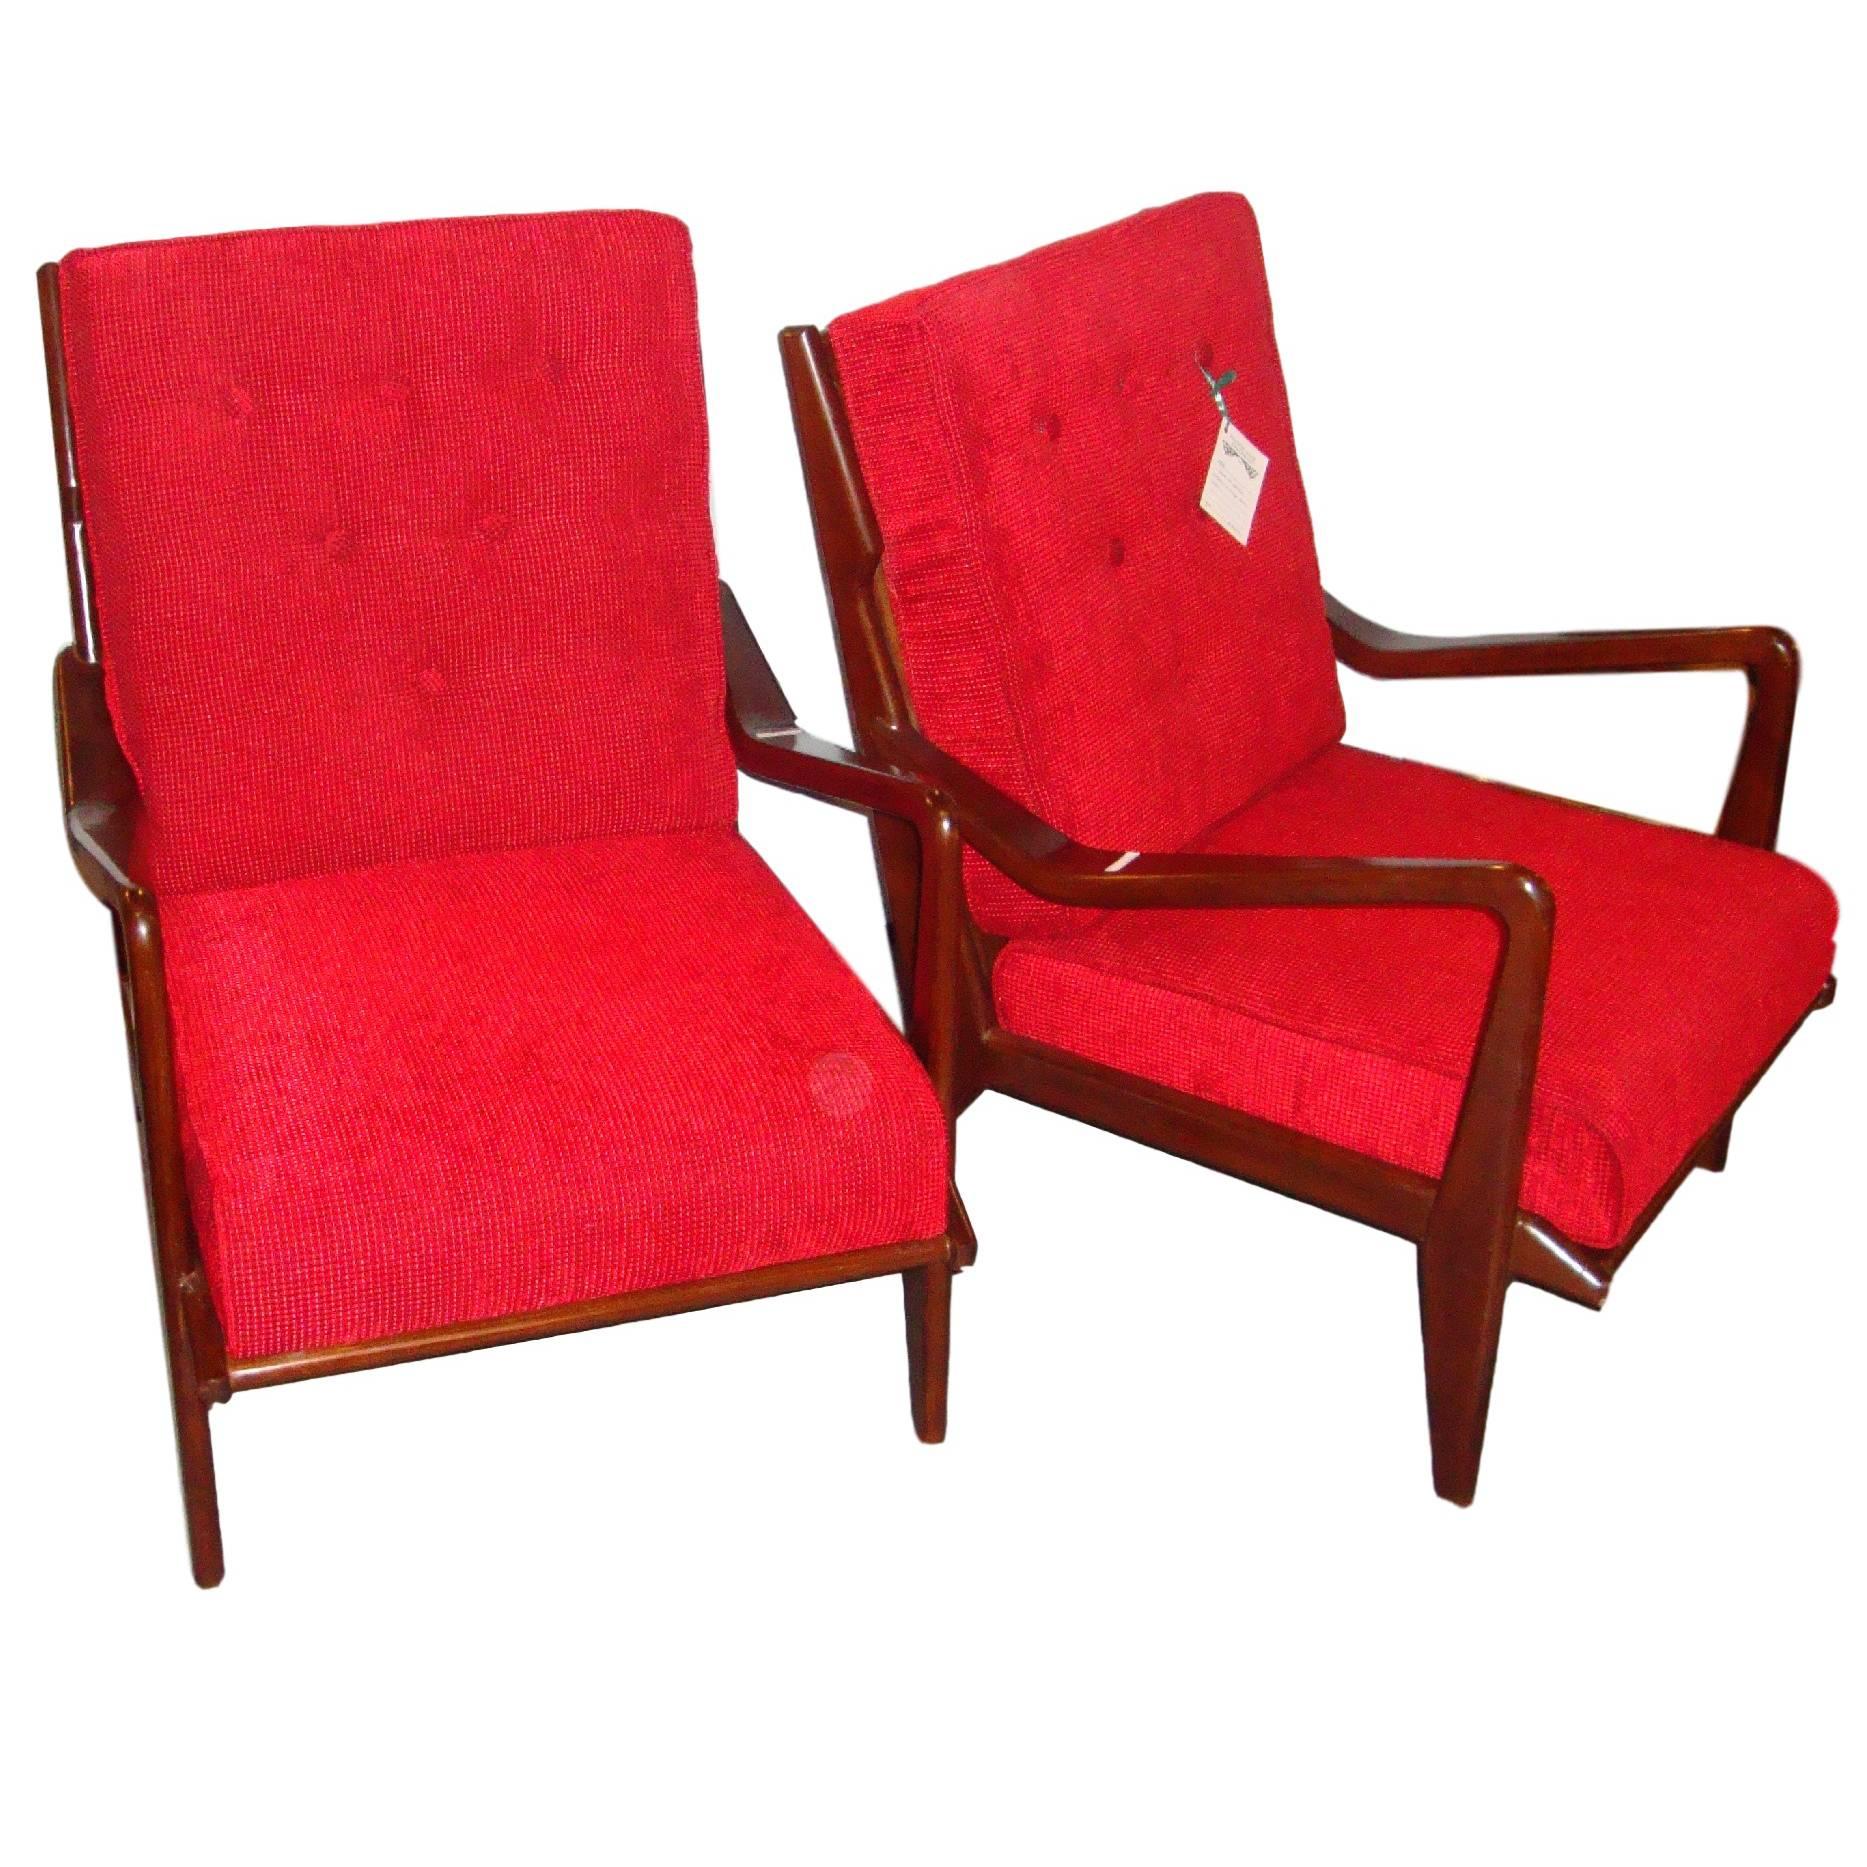 Pair of Mid-Century Modern Style Lounge Chairs